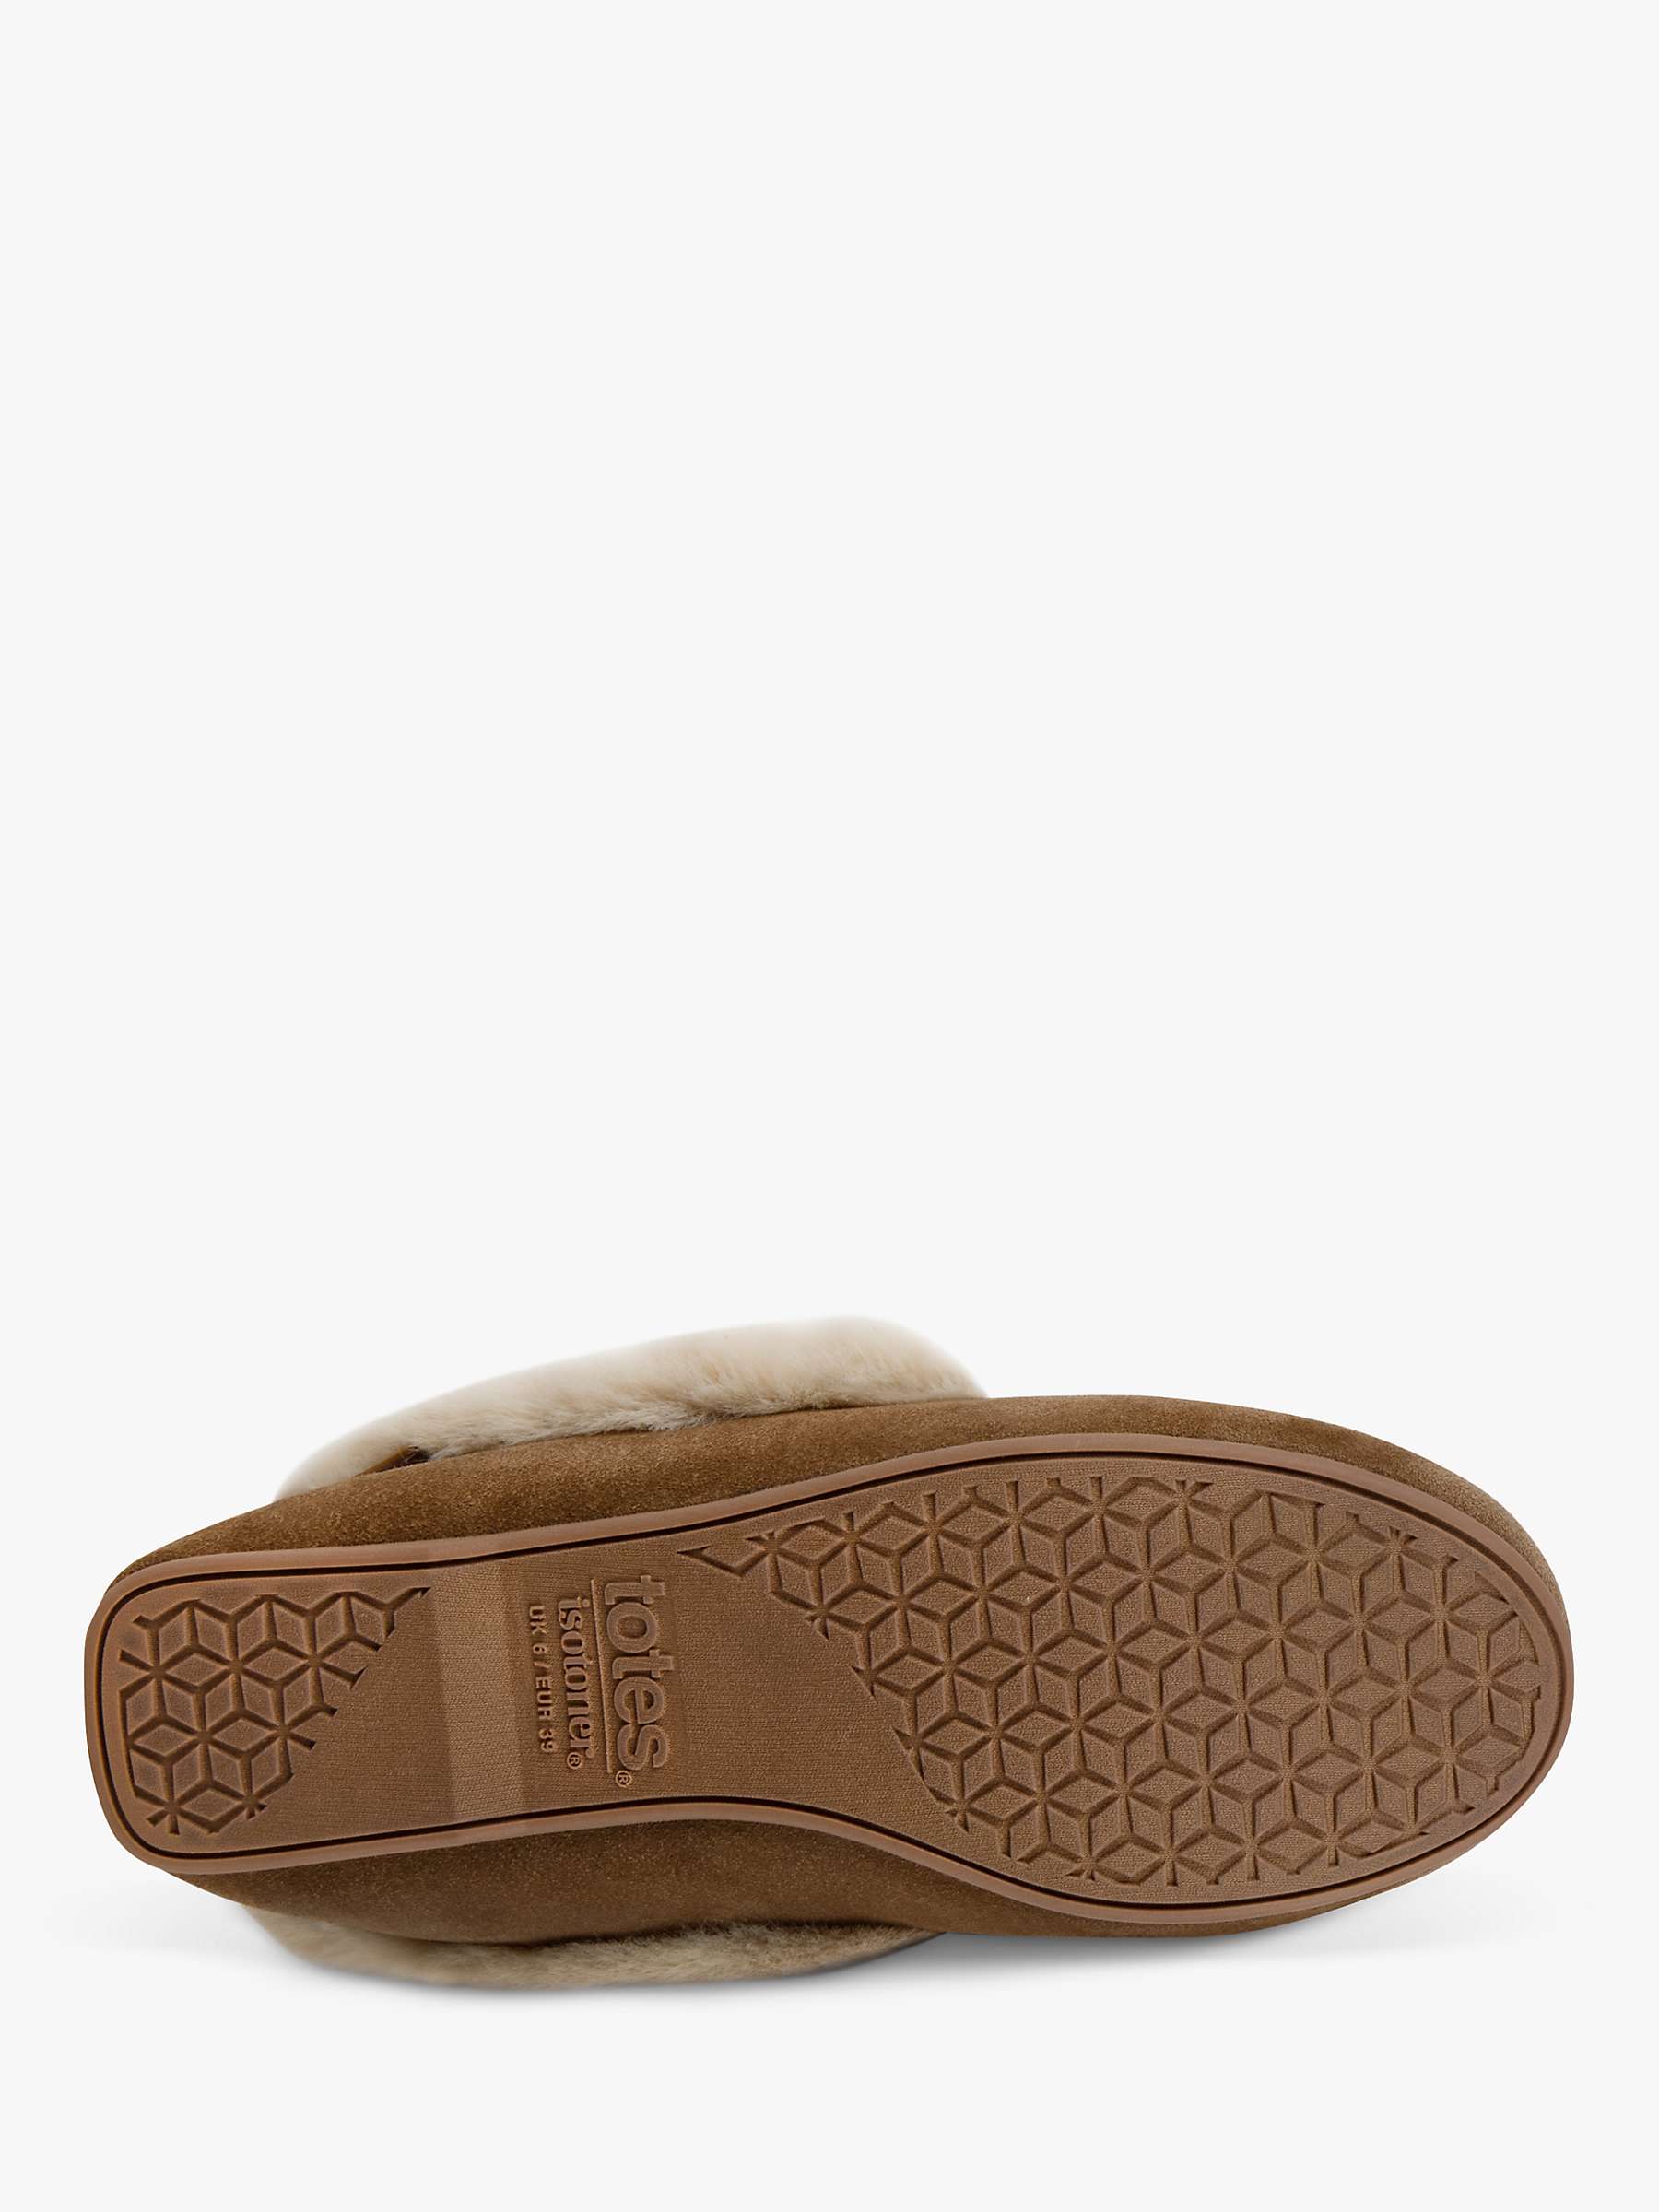 Buy totes Genuine Suede Moccasin with Faux Fur Lining Slippers, Tan Online at johnlewis.com